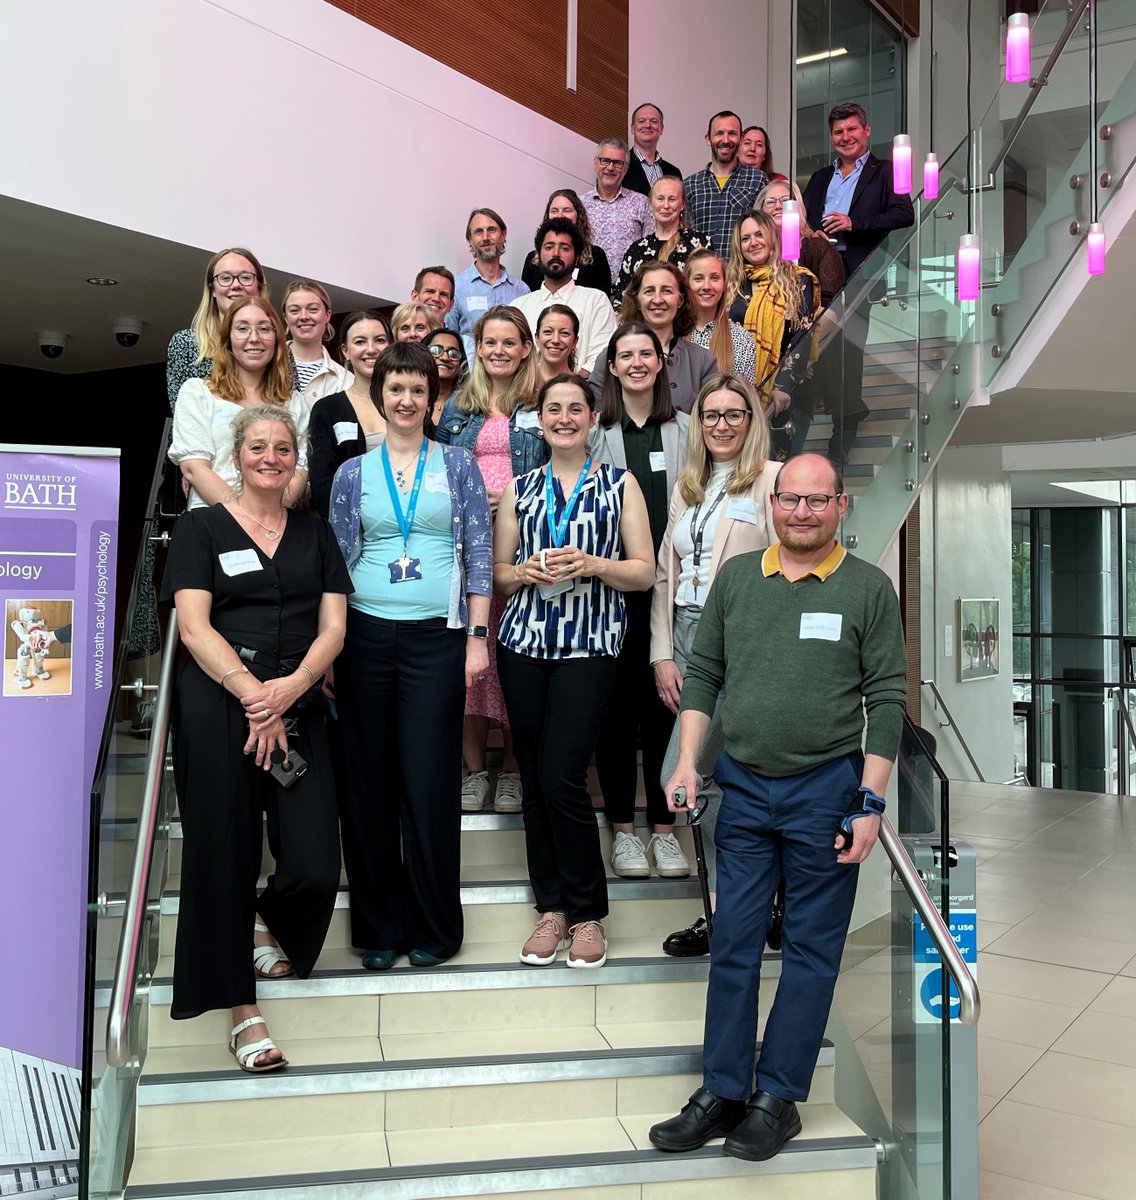 Last week was the first time that the CRIISP Consortium Team met face to face. It was a great day of sharing, team building and networking. @DrEdKeogh @Chris_Eccleston @RGoobermanHill @CandyMcCabe1 @TonyPi314 @dr_wainwright @EmmaFisher1 @drabbiejordan @anica_zeyen @hannah_sallis